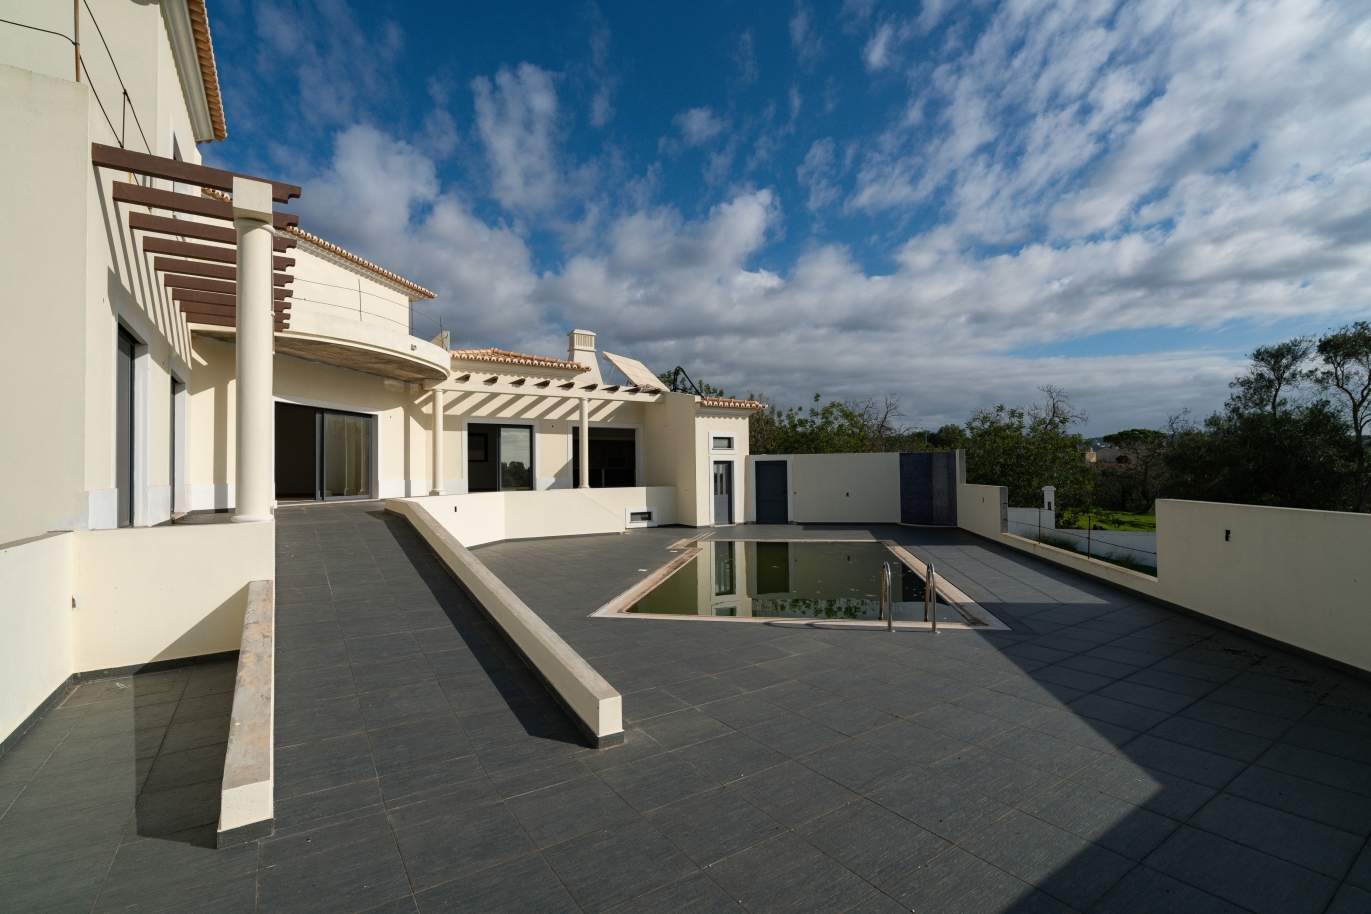 4 bedrooms Villa, under construction, with mountain and sea view, near Boliqueime, Algarve_157005